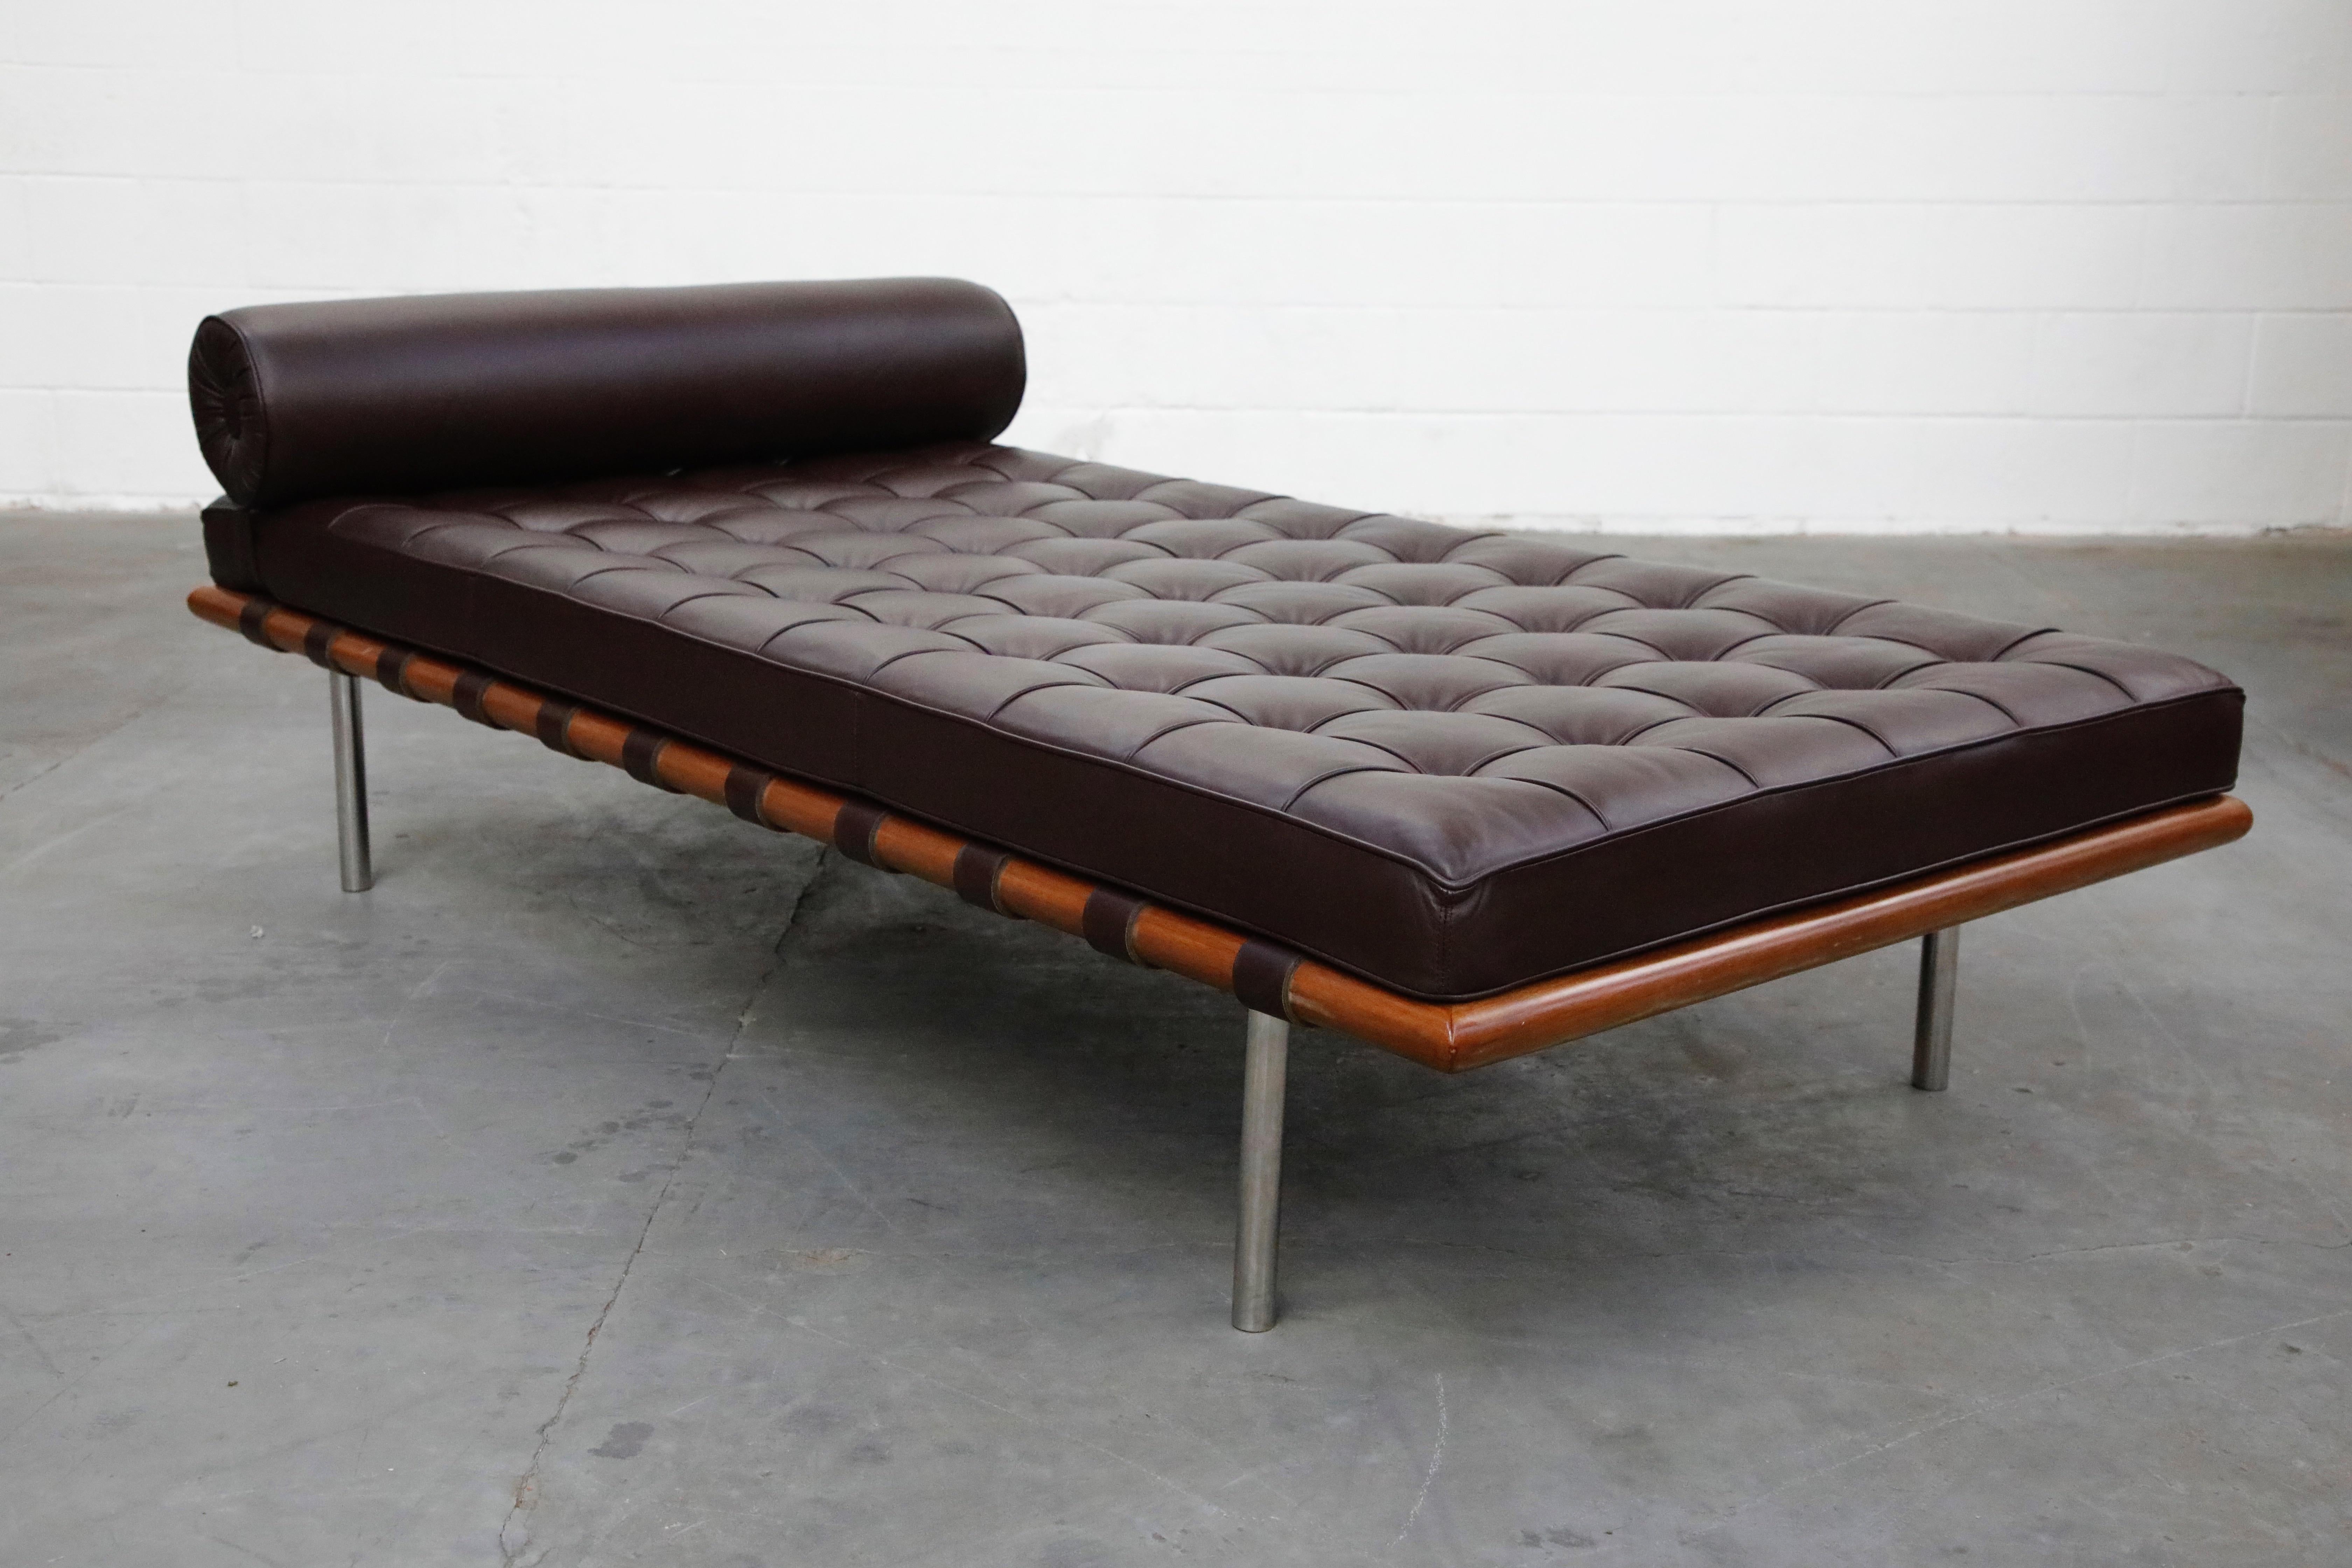 Modern Barcelona Daybed by Mies Van Der Rohe for Knoll in Dark Brown Leather, Signed